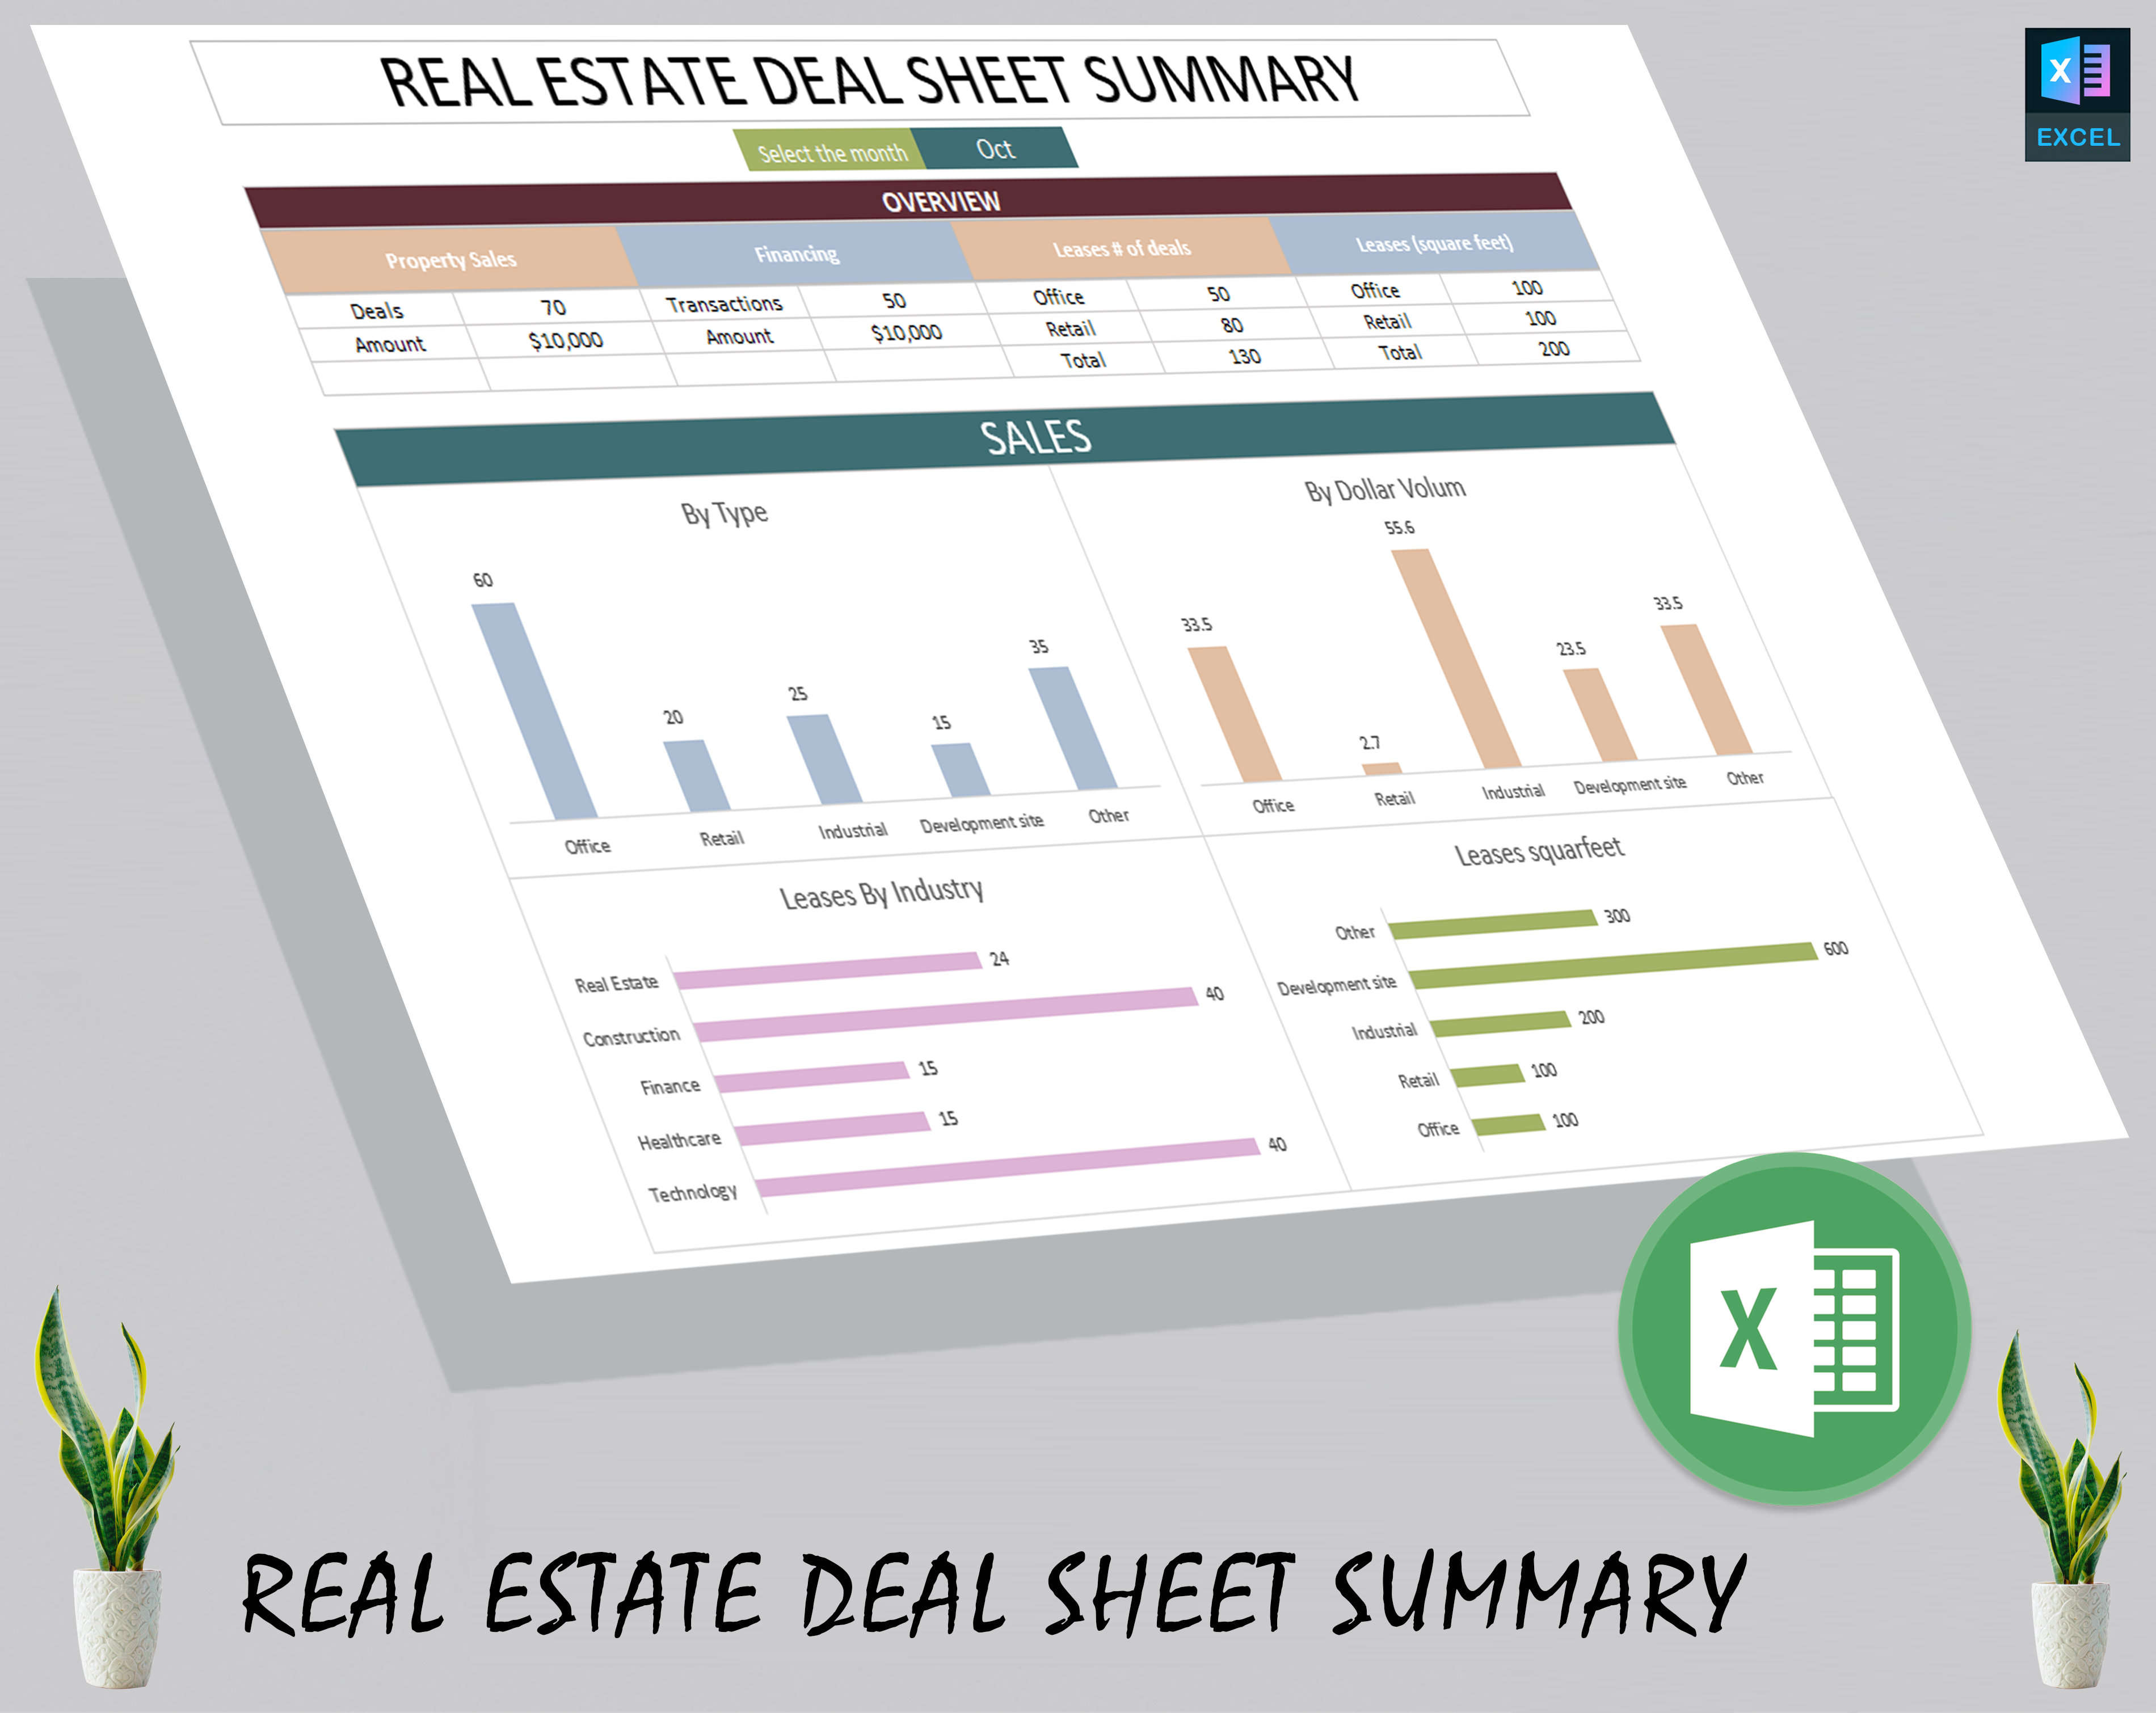 Real estate deal sheet summary